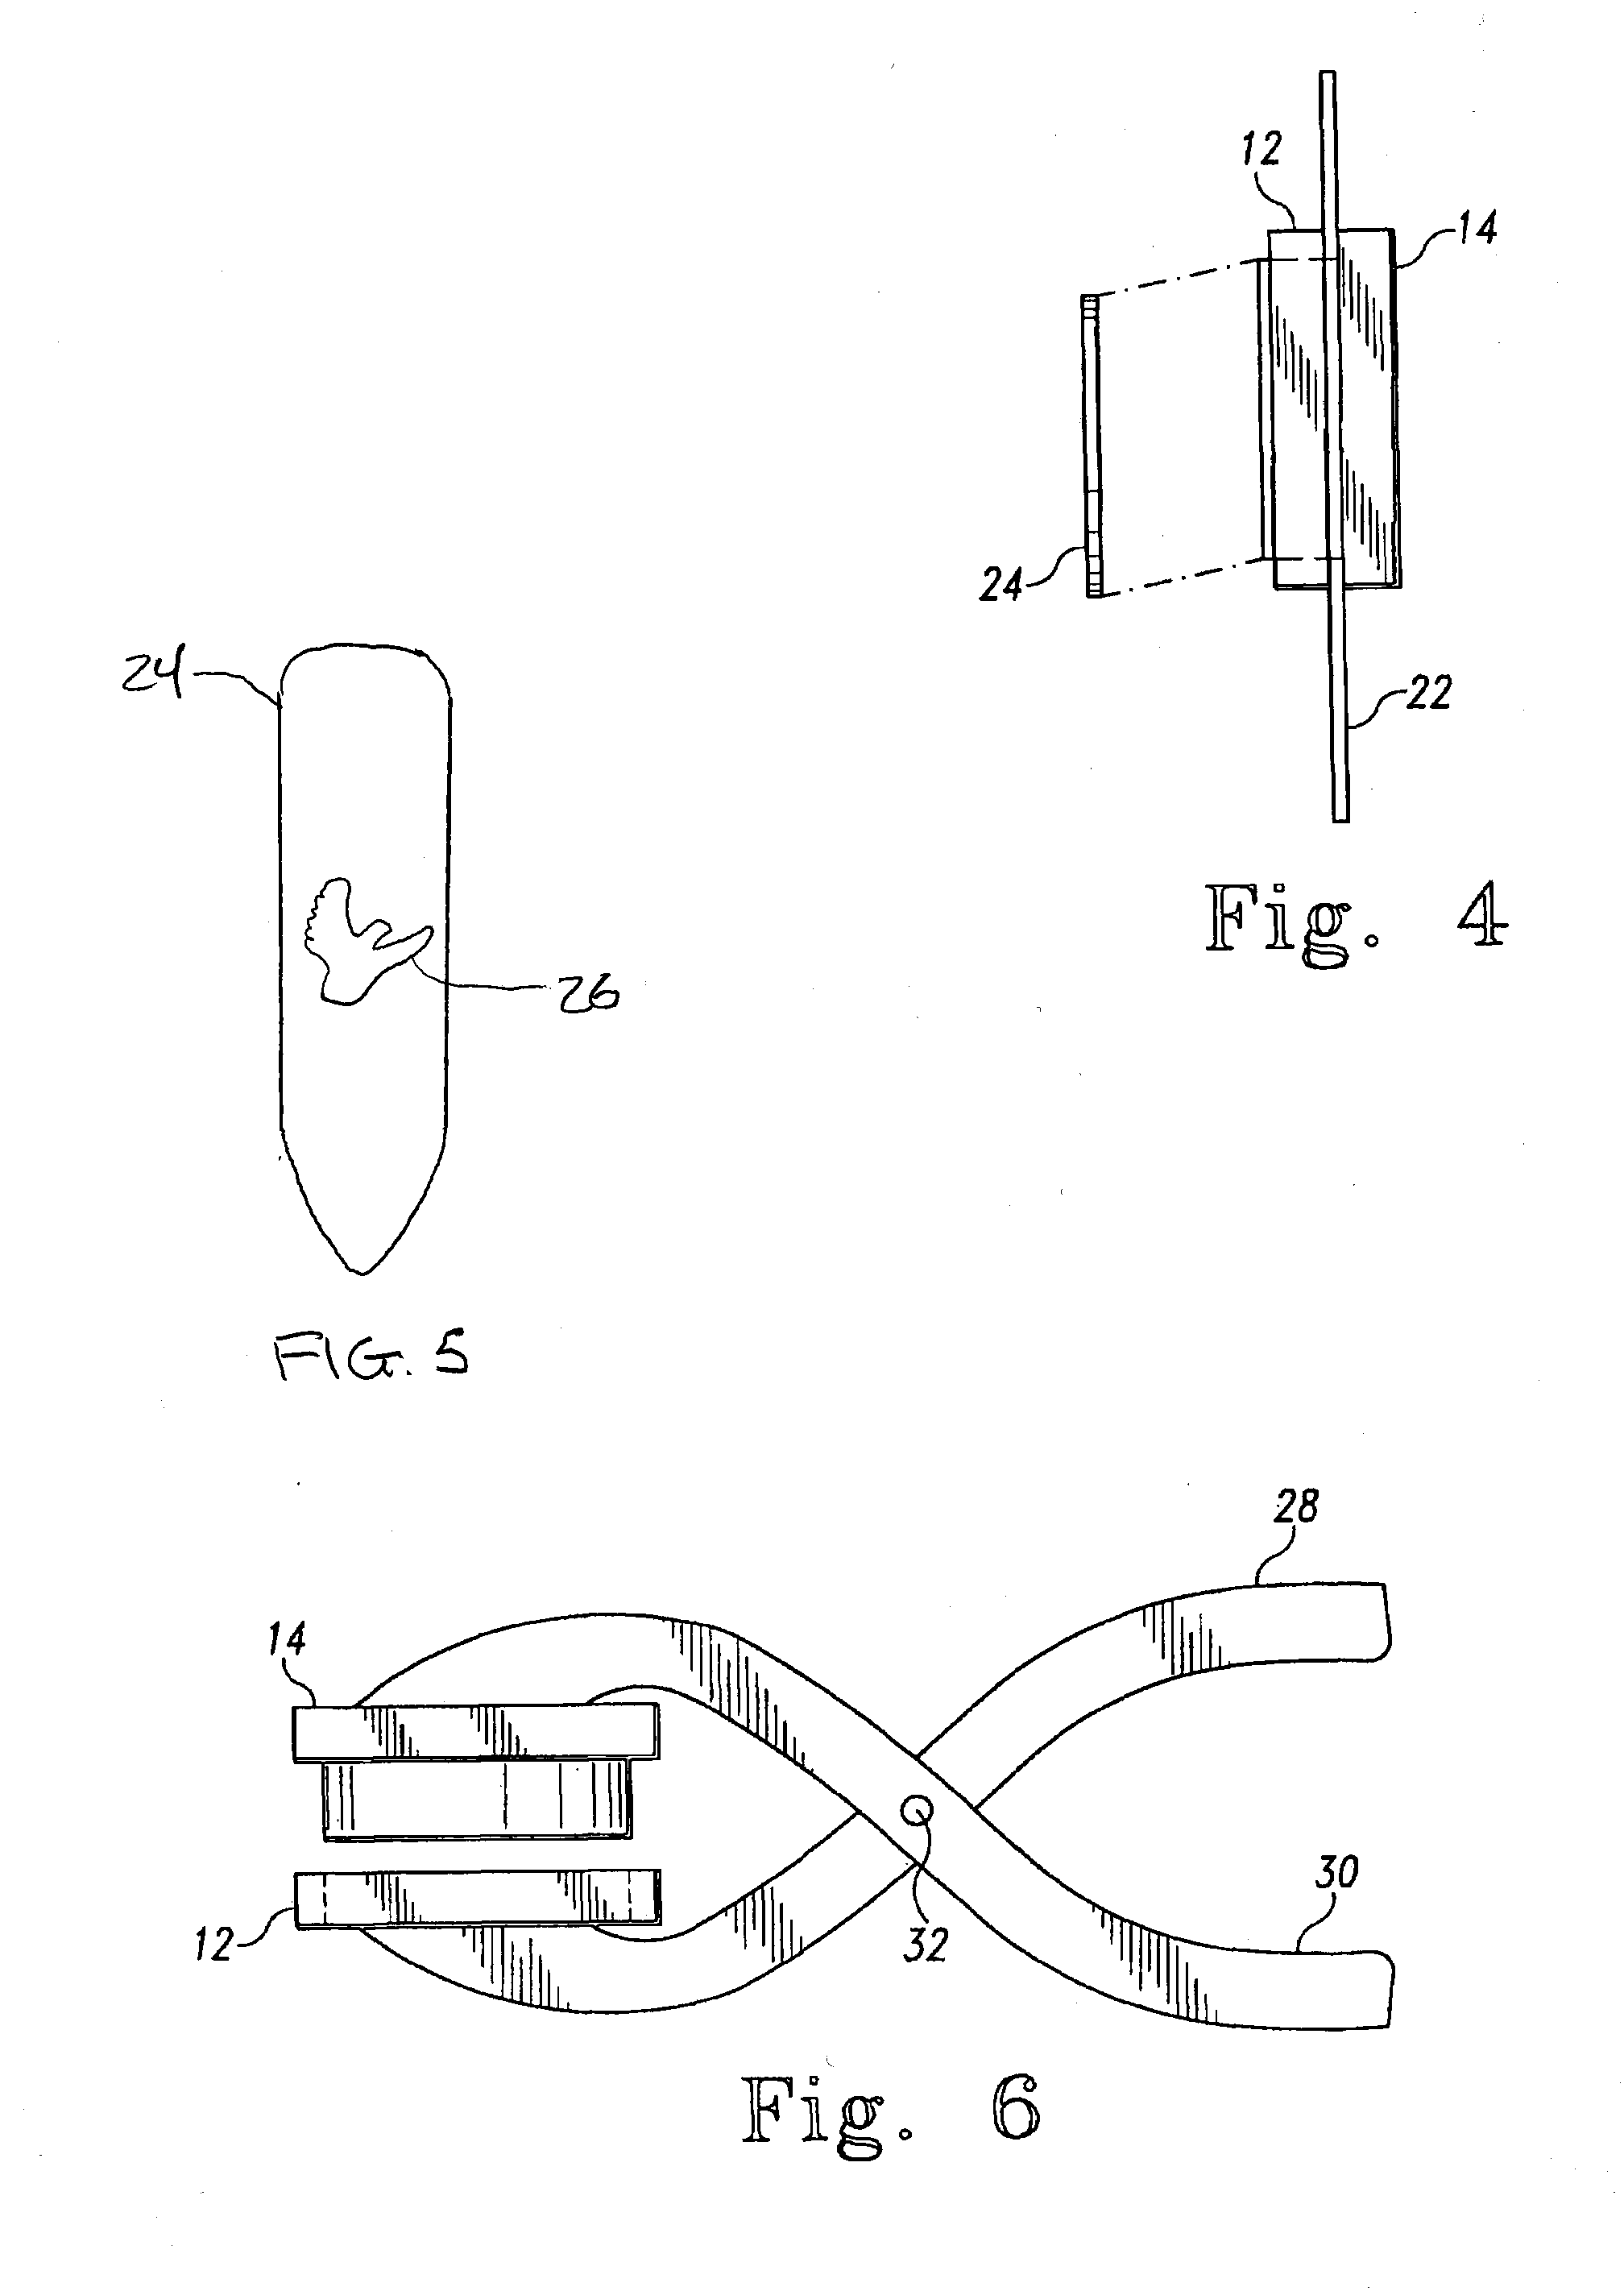 Method of producing collar stays from identification cards